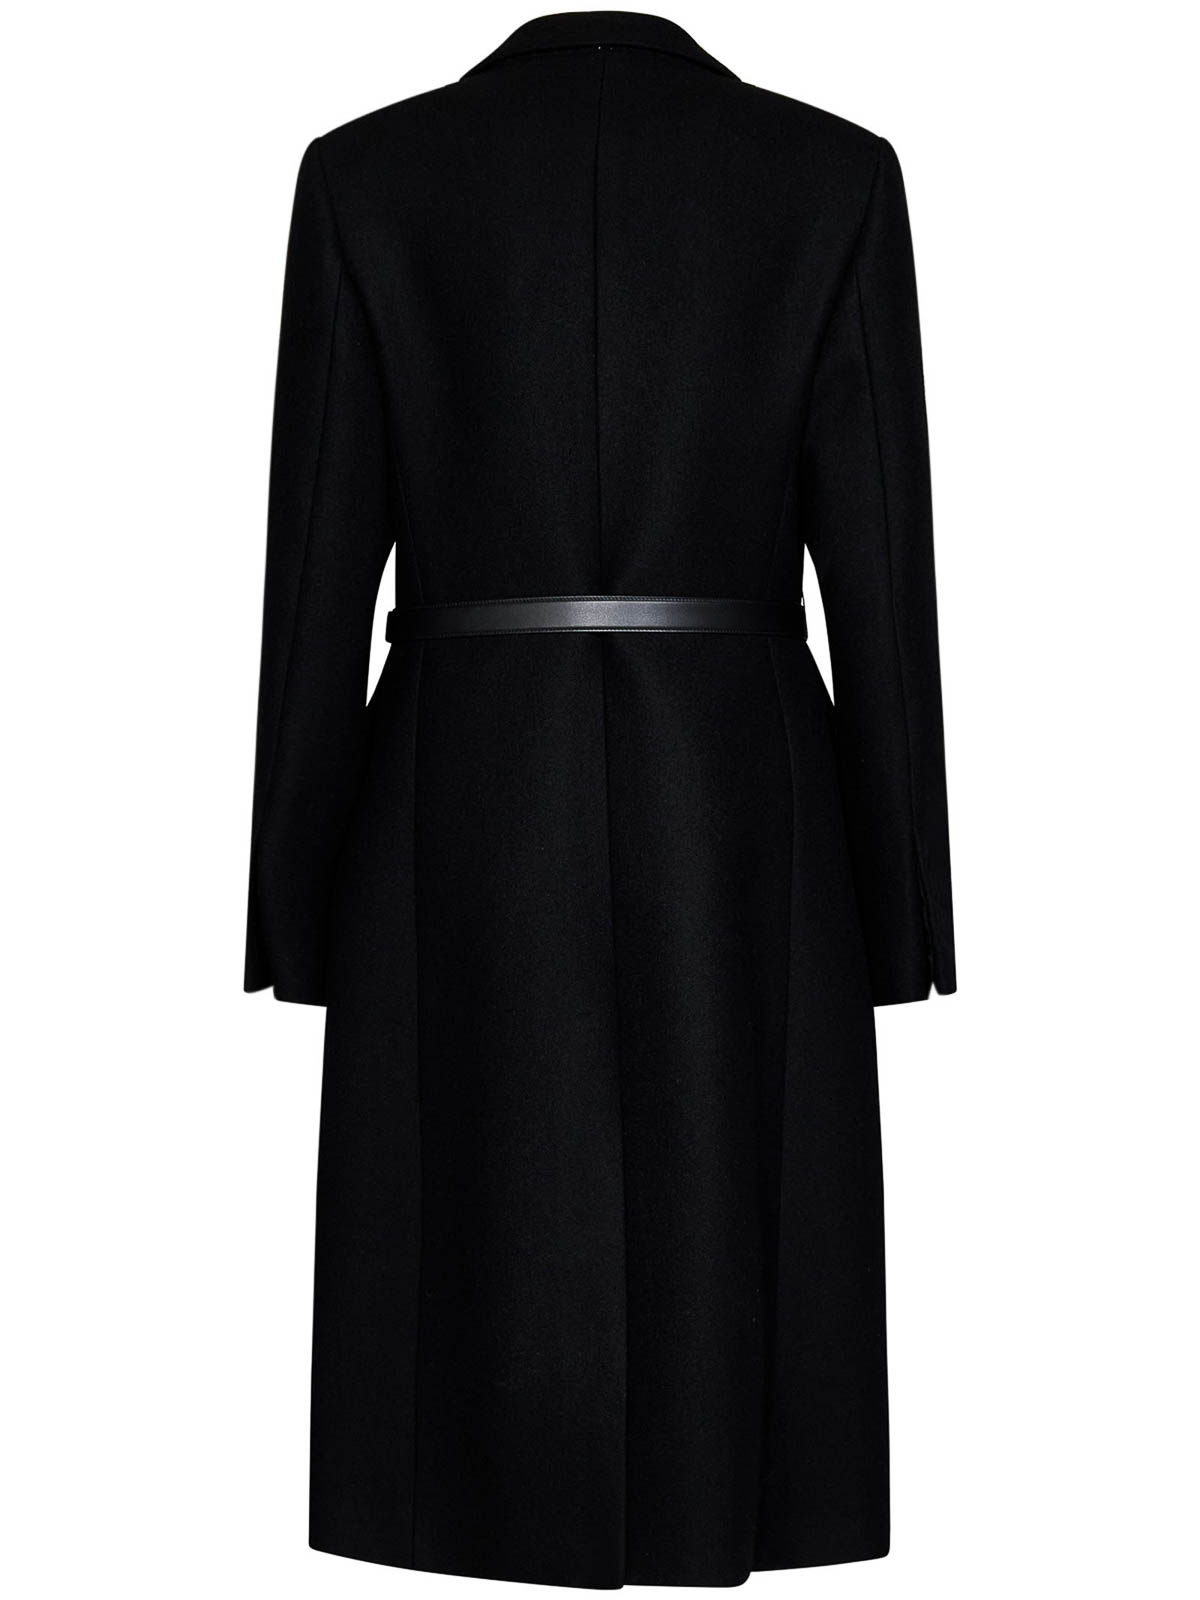 Shop Burberry Black Camel Hair And Wool Coat With Belt